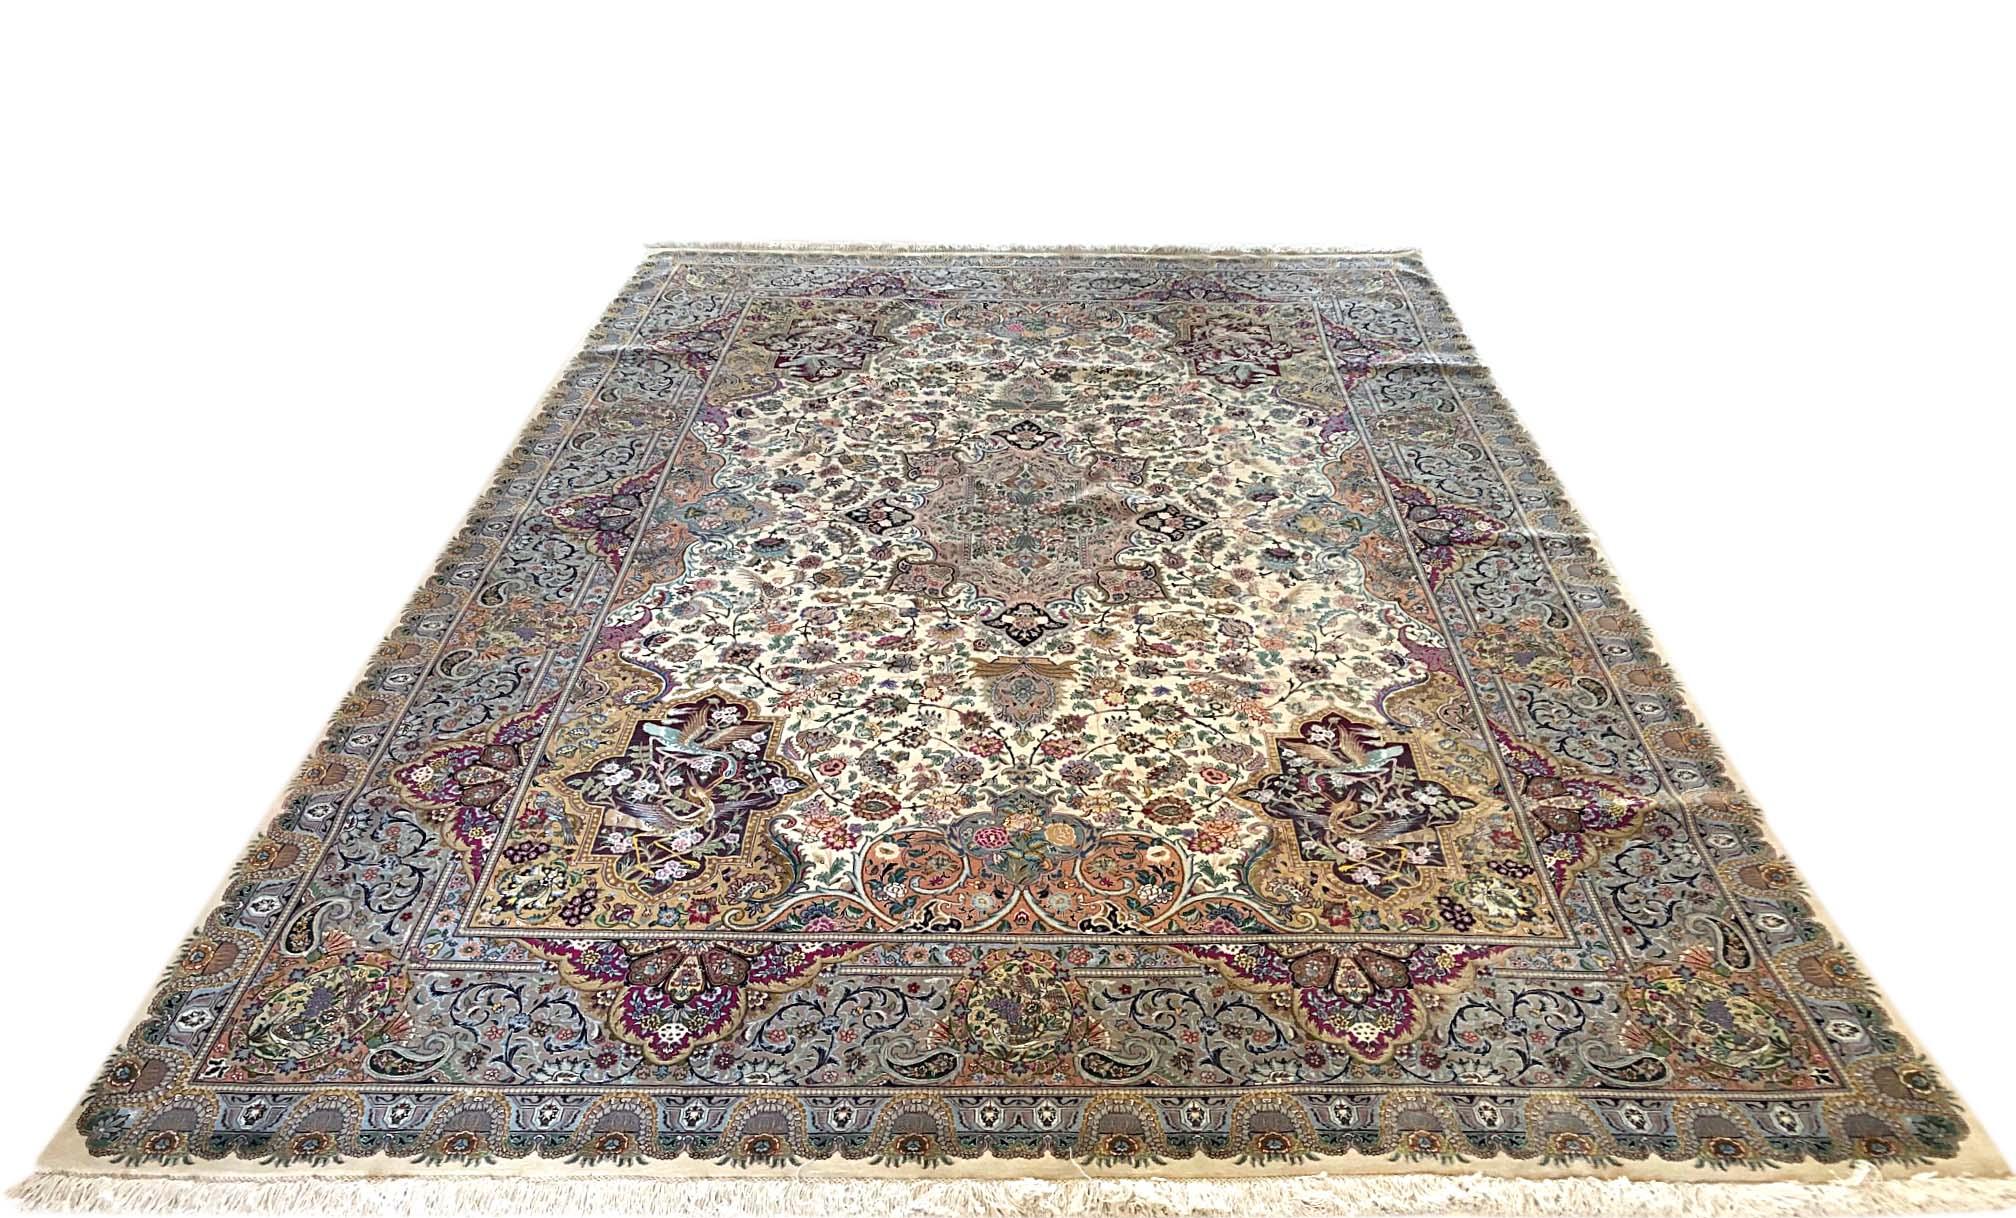 This stunning piece is a hand knotted Persian Tabriz rug with floral design and a very unique oval medallion. The pile is wool and silk with silk foundation. The size is 8 feet 2 inches wide by feet 11 feet 5 inches tall. The base color is cream and